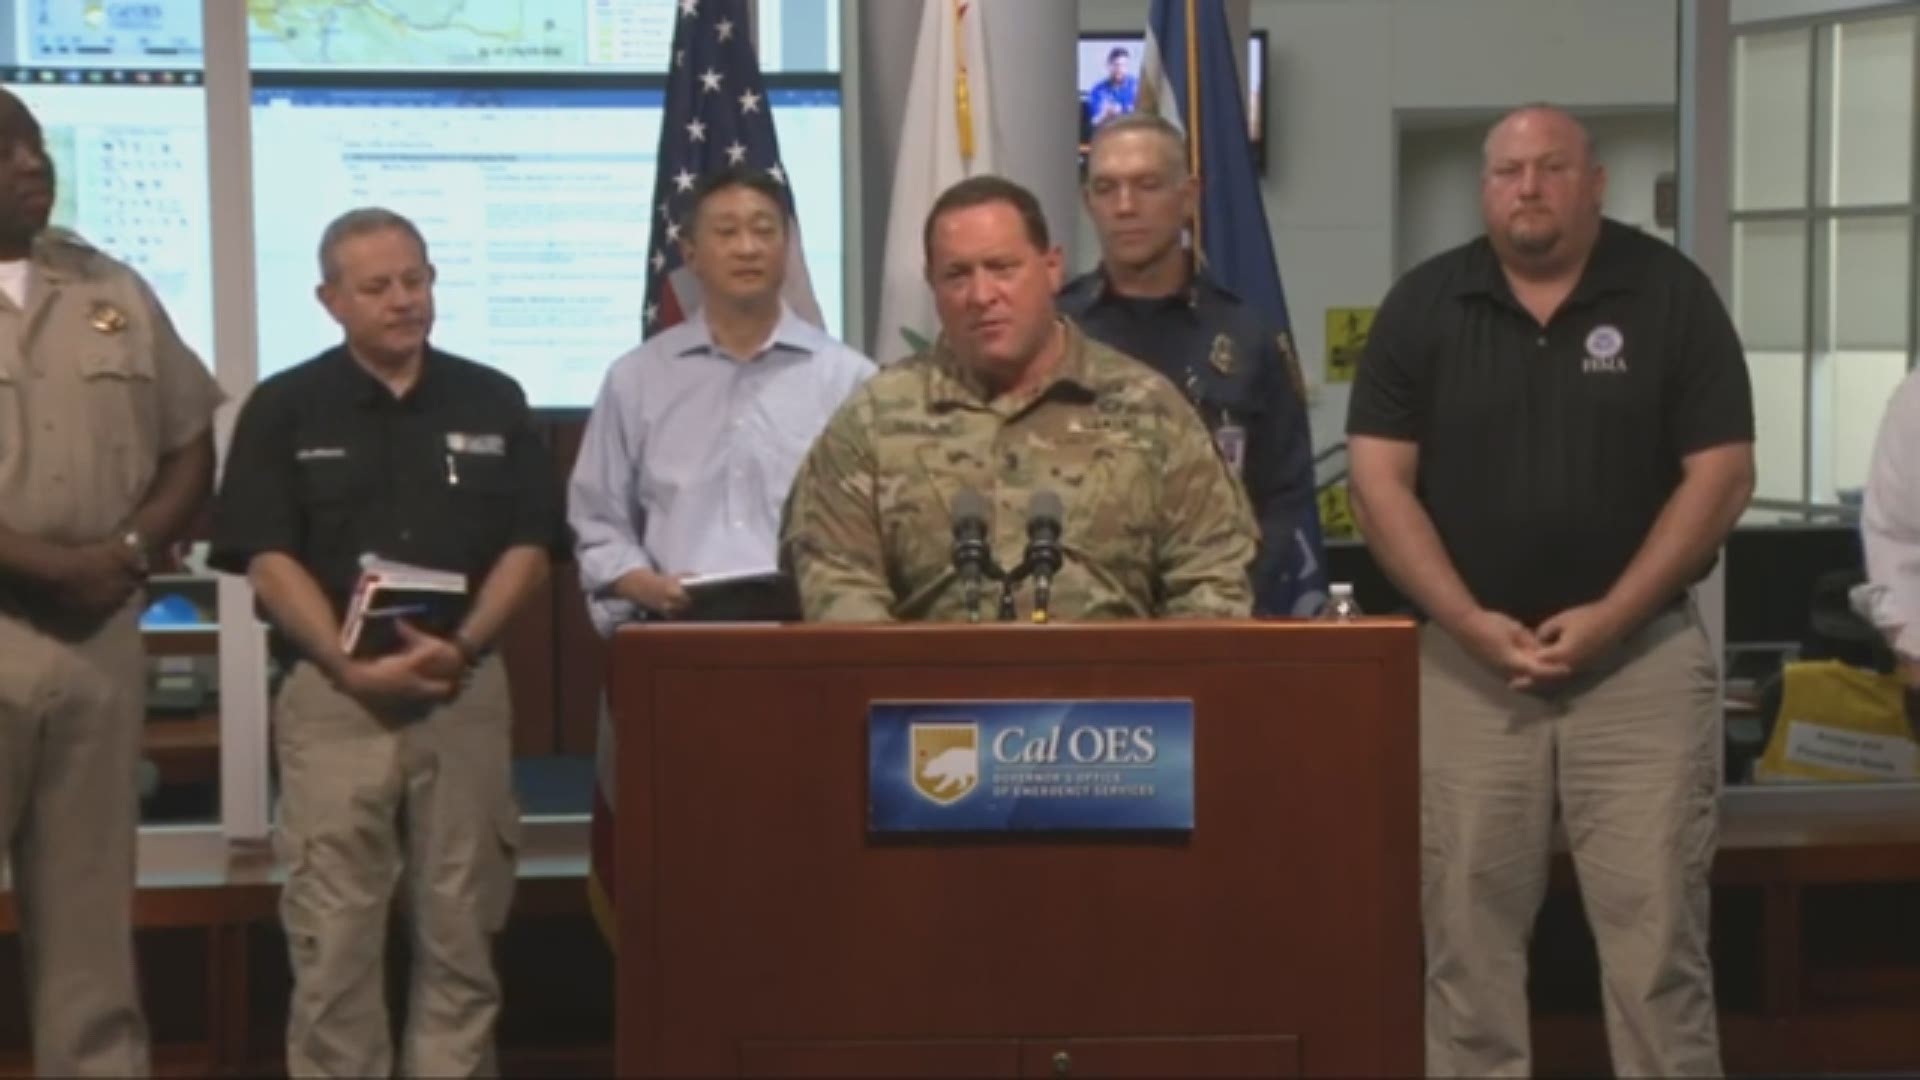 On July 6 state emergency officials gave an update on the 7.1 earthquake that struck near Ridgecrest on Friday night.